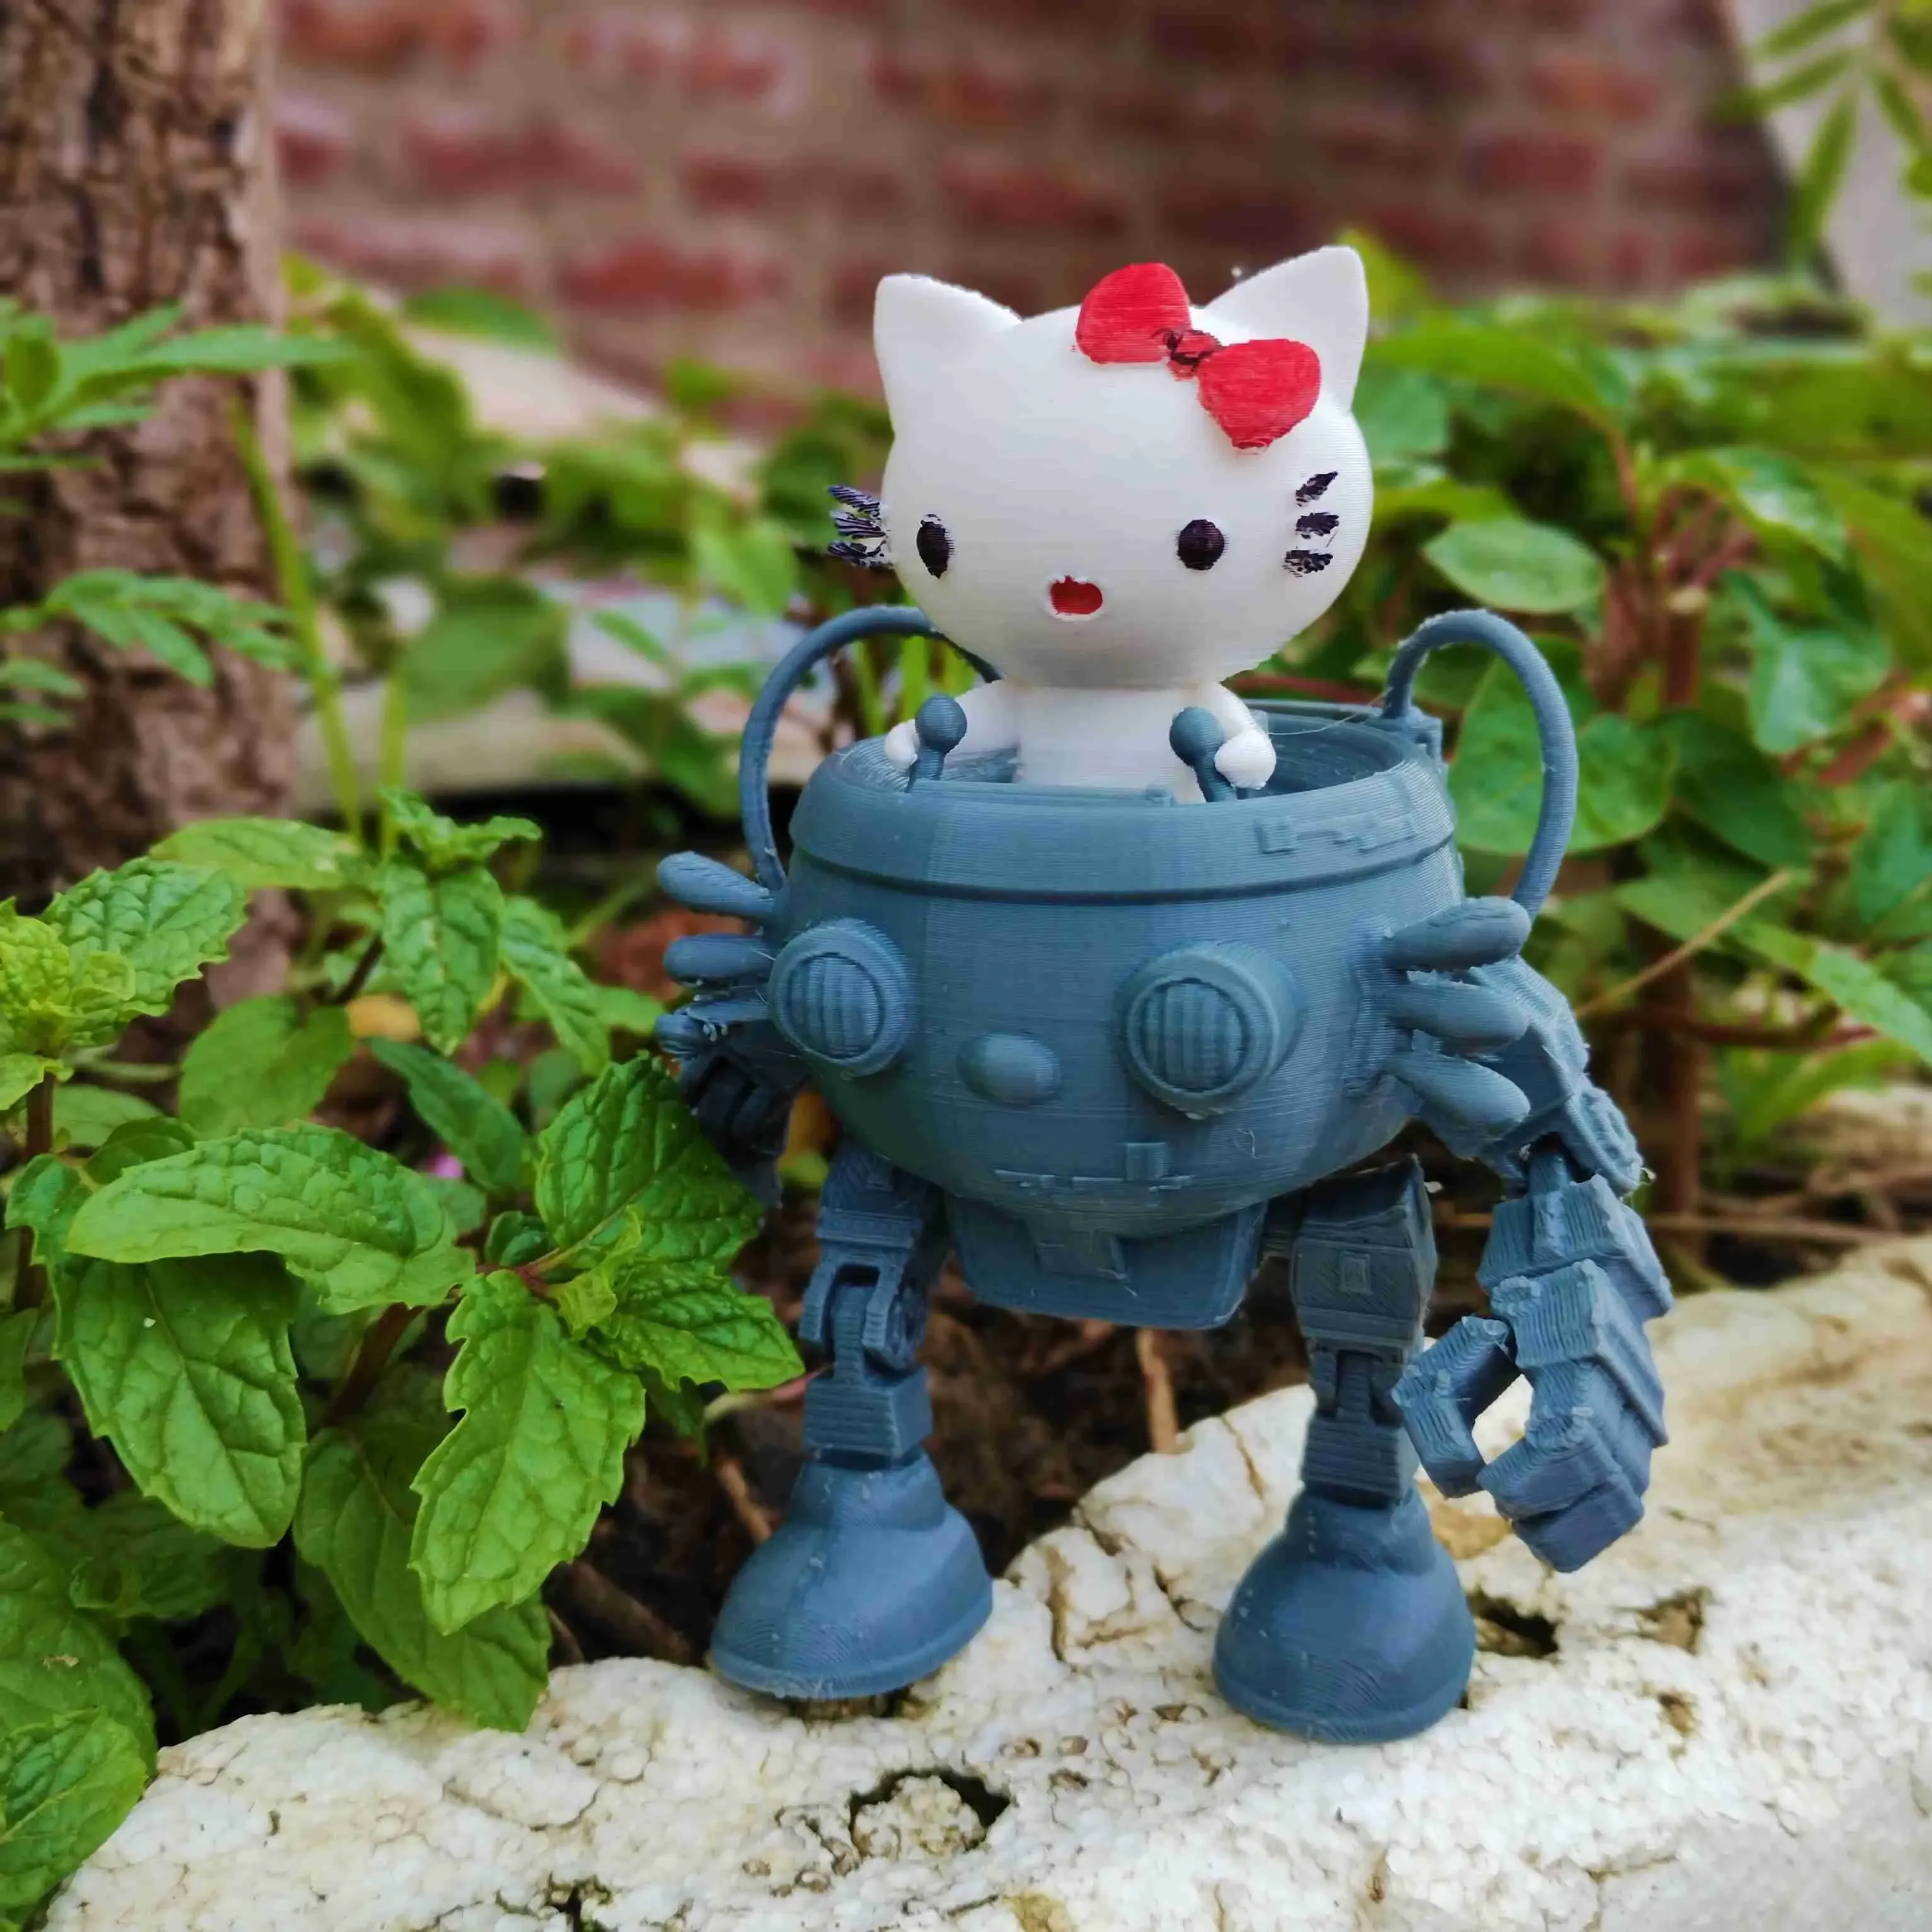 HELLO KITTY BOT, A ROBOT PILOTED BY AN ADORABLE HELLO KITTY